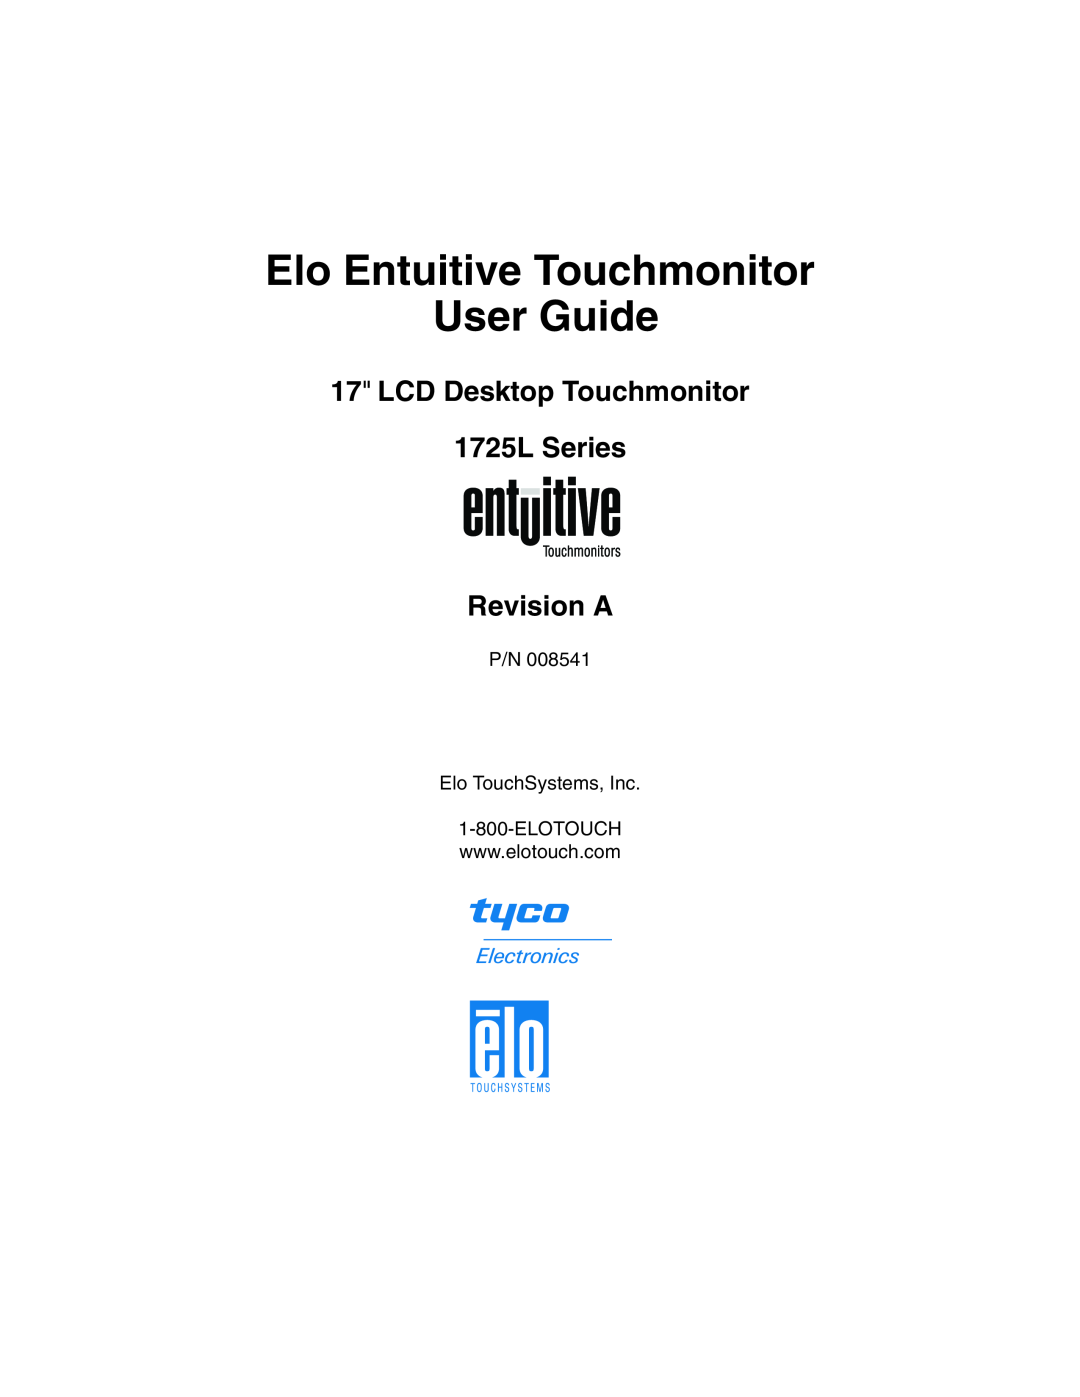 Elo TouchSystems 1725L Series manual Elo Entuitive Touchmonitor User Guide, P/N Elo TouchSystems, Inc 